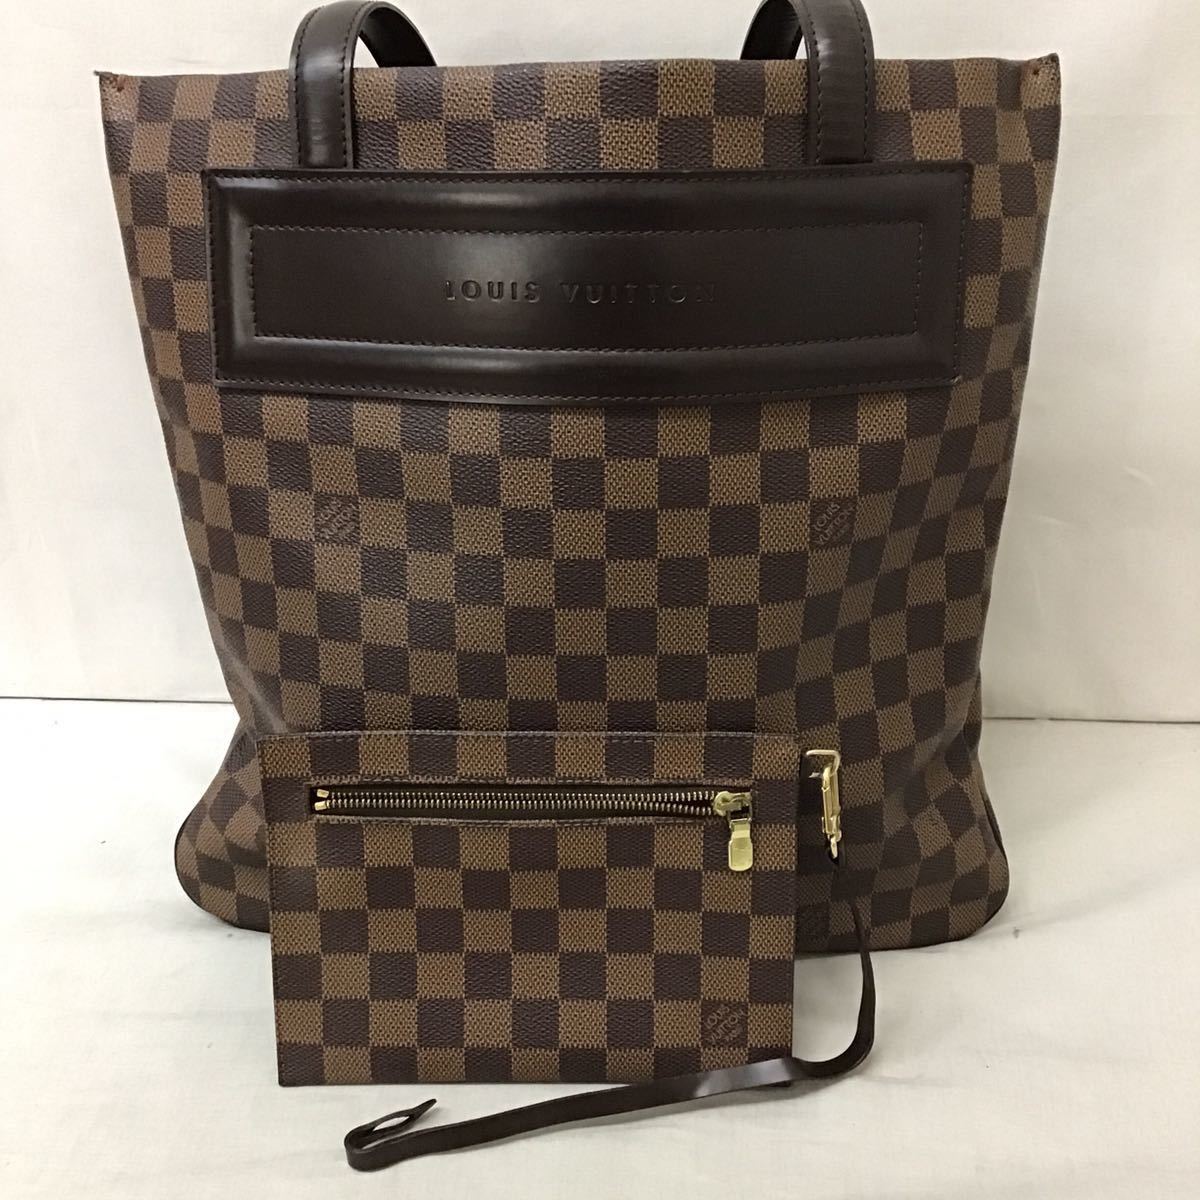 220115【LOUIS VUITTON】ルイヴィトン トートバッグ ブラウン N51149 ダミエ クリフトン ポーチ_画像1